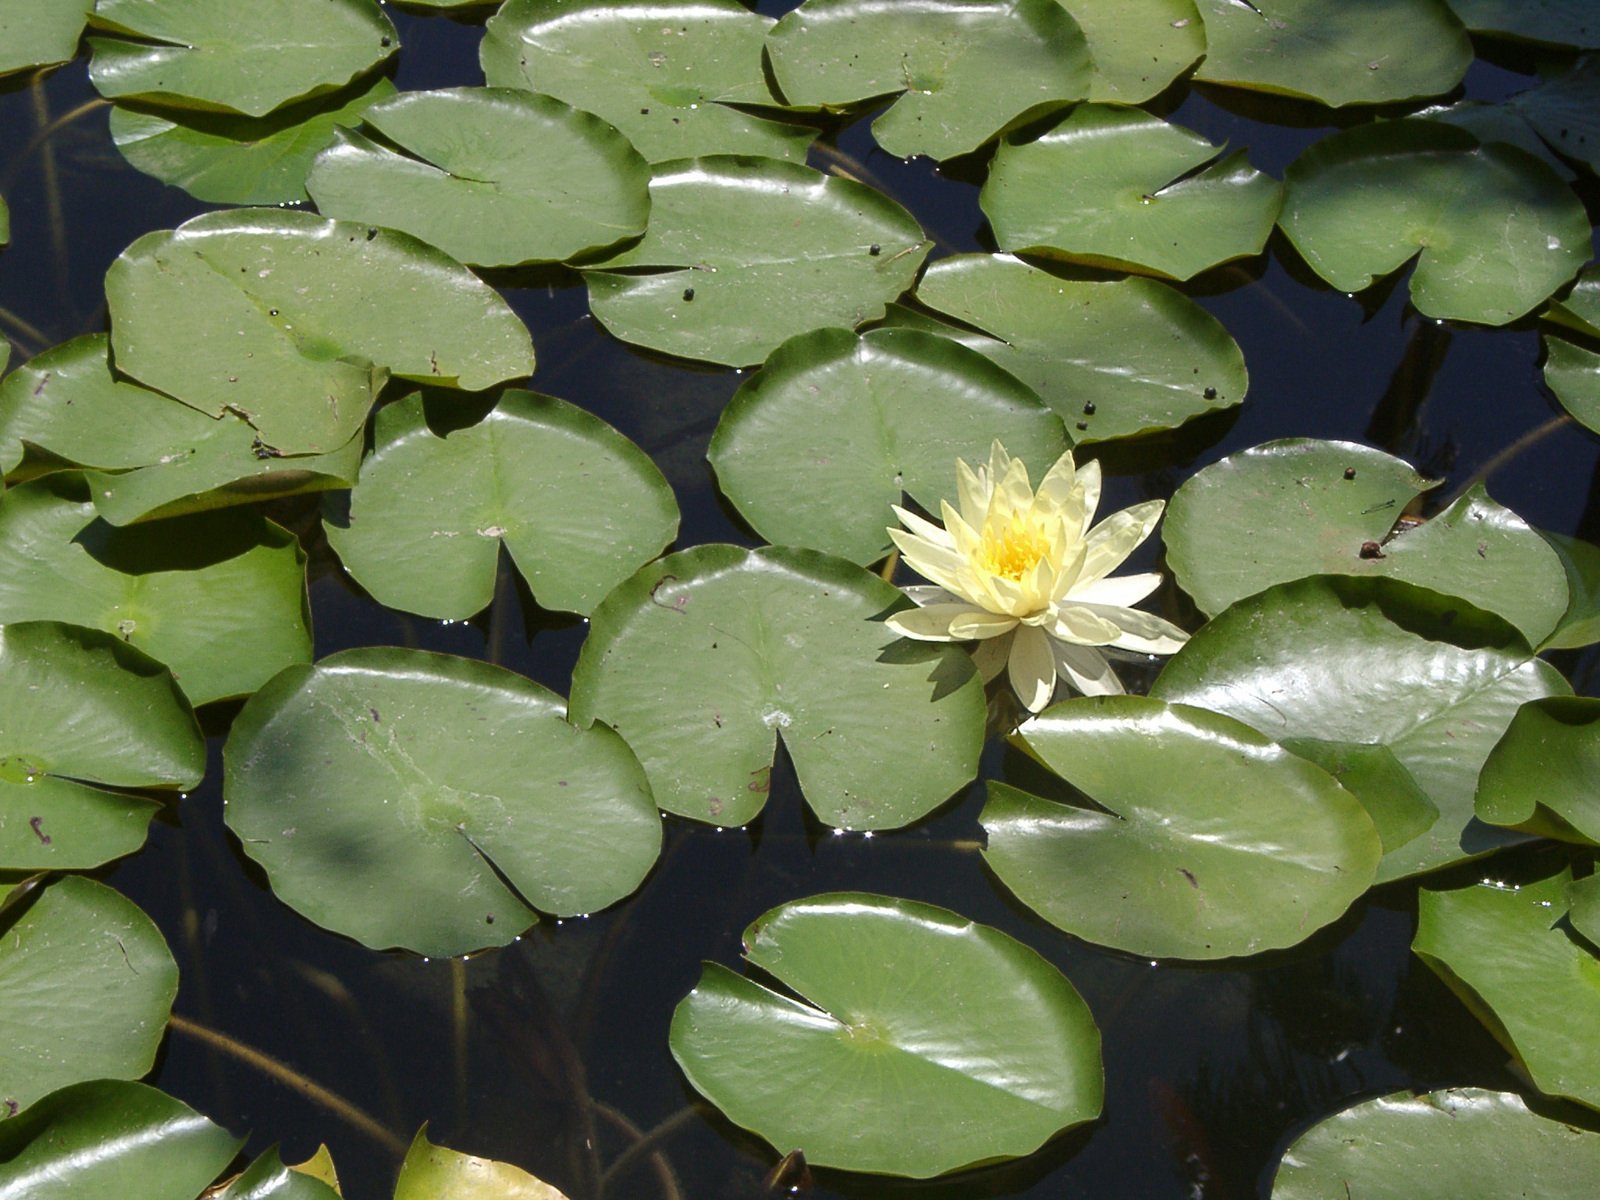 white lily paddling on water in a pond